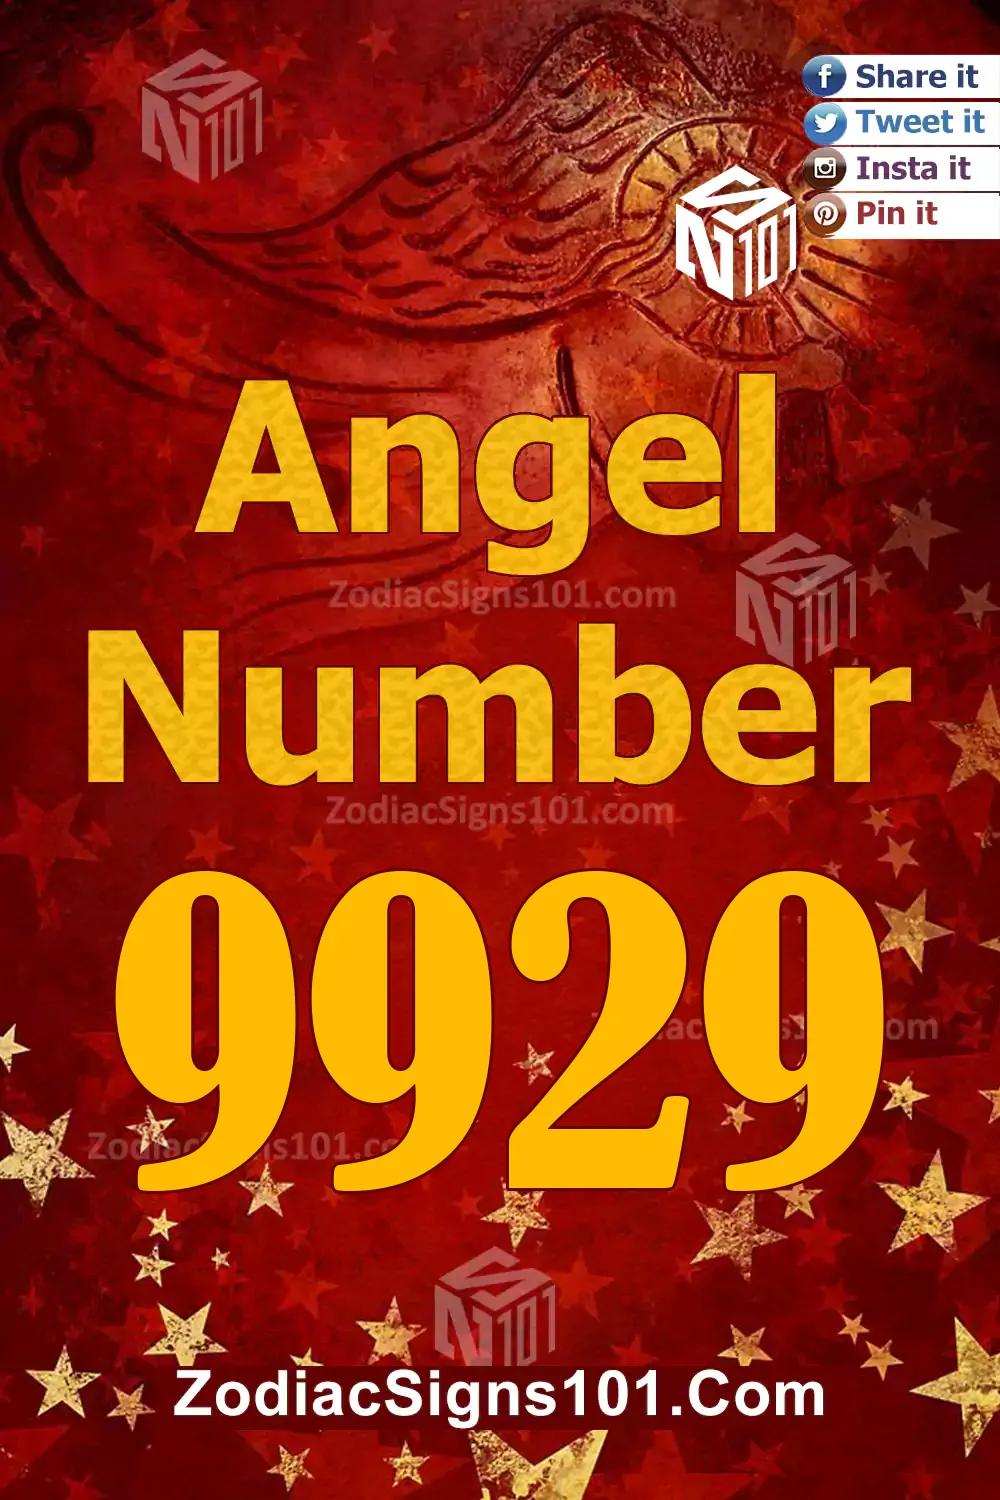 9929 Angel Number Meaning